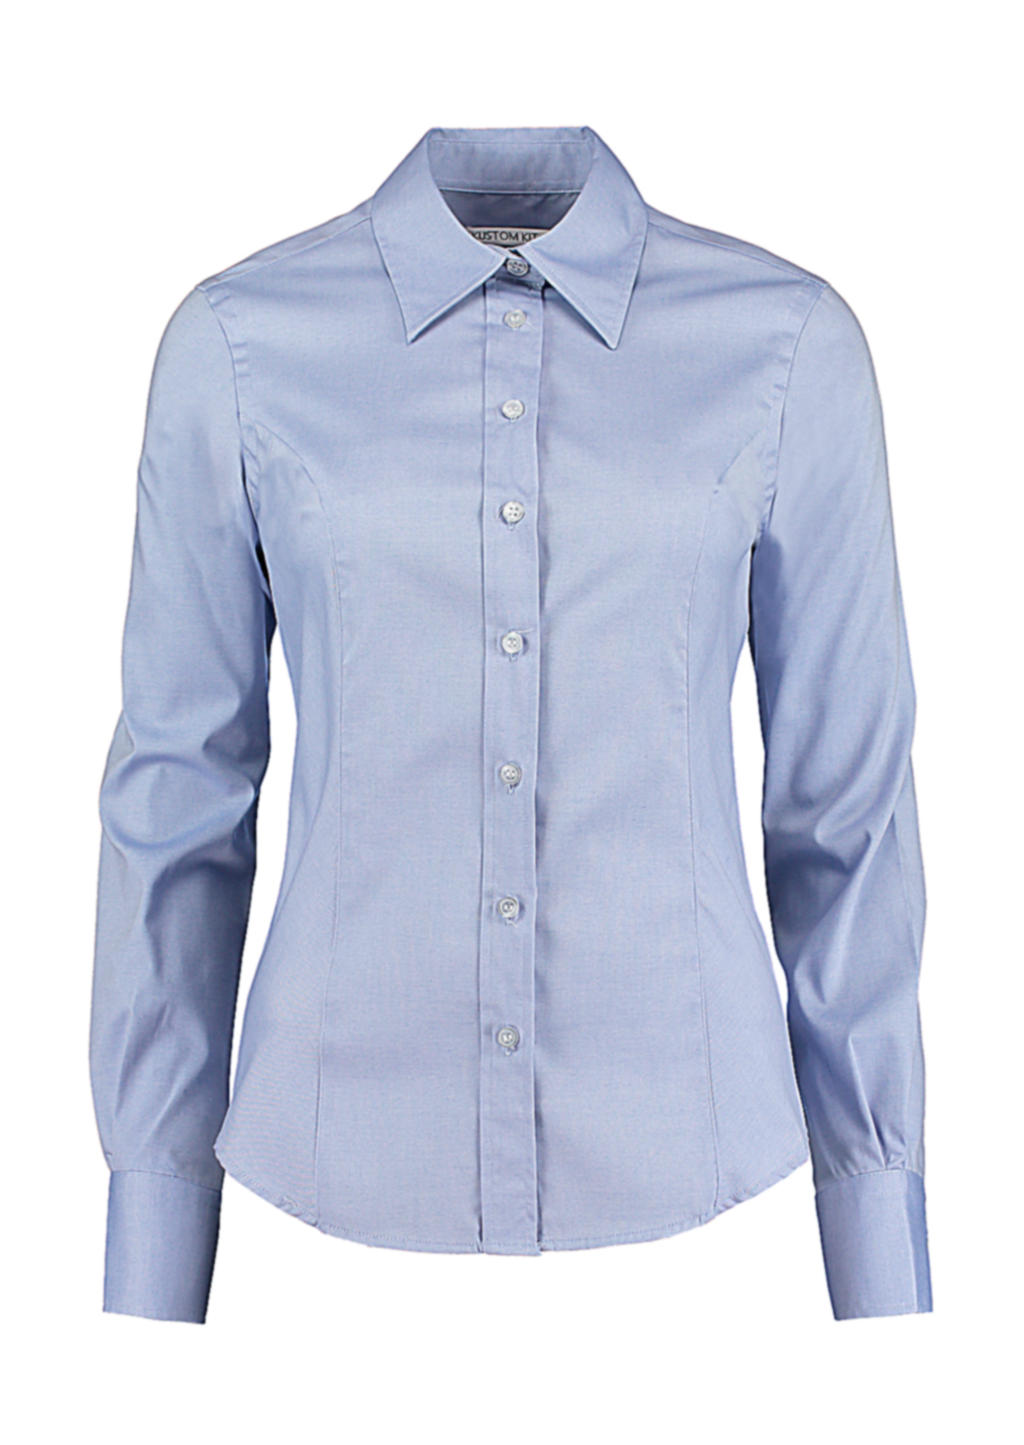  Womens Tailored Fit Premium Oxford Shirt in Farbe Light Blue